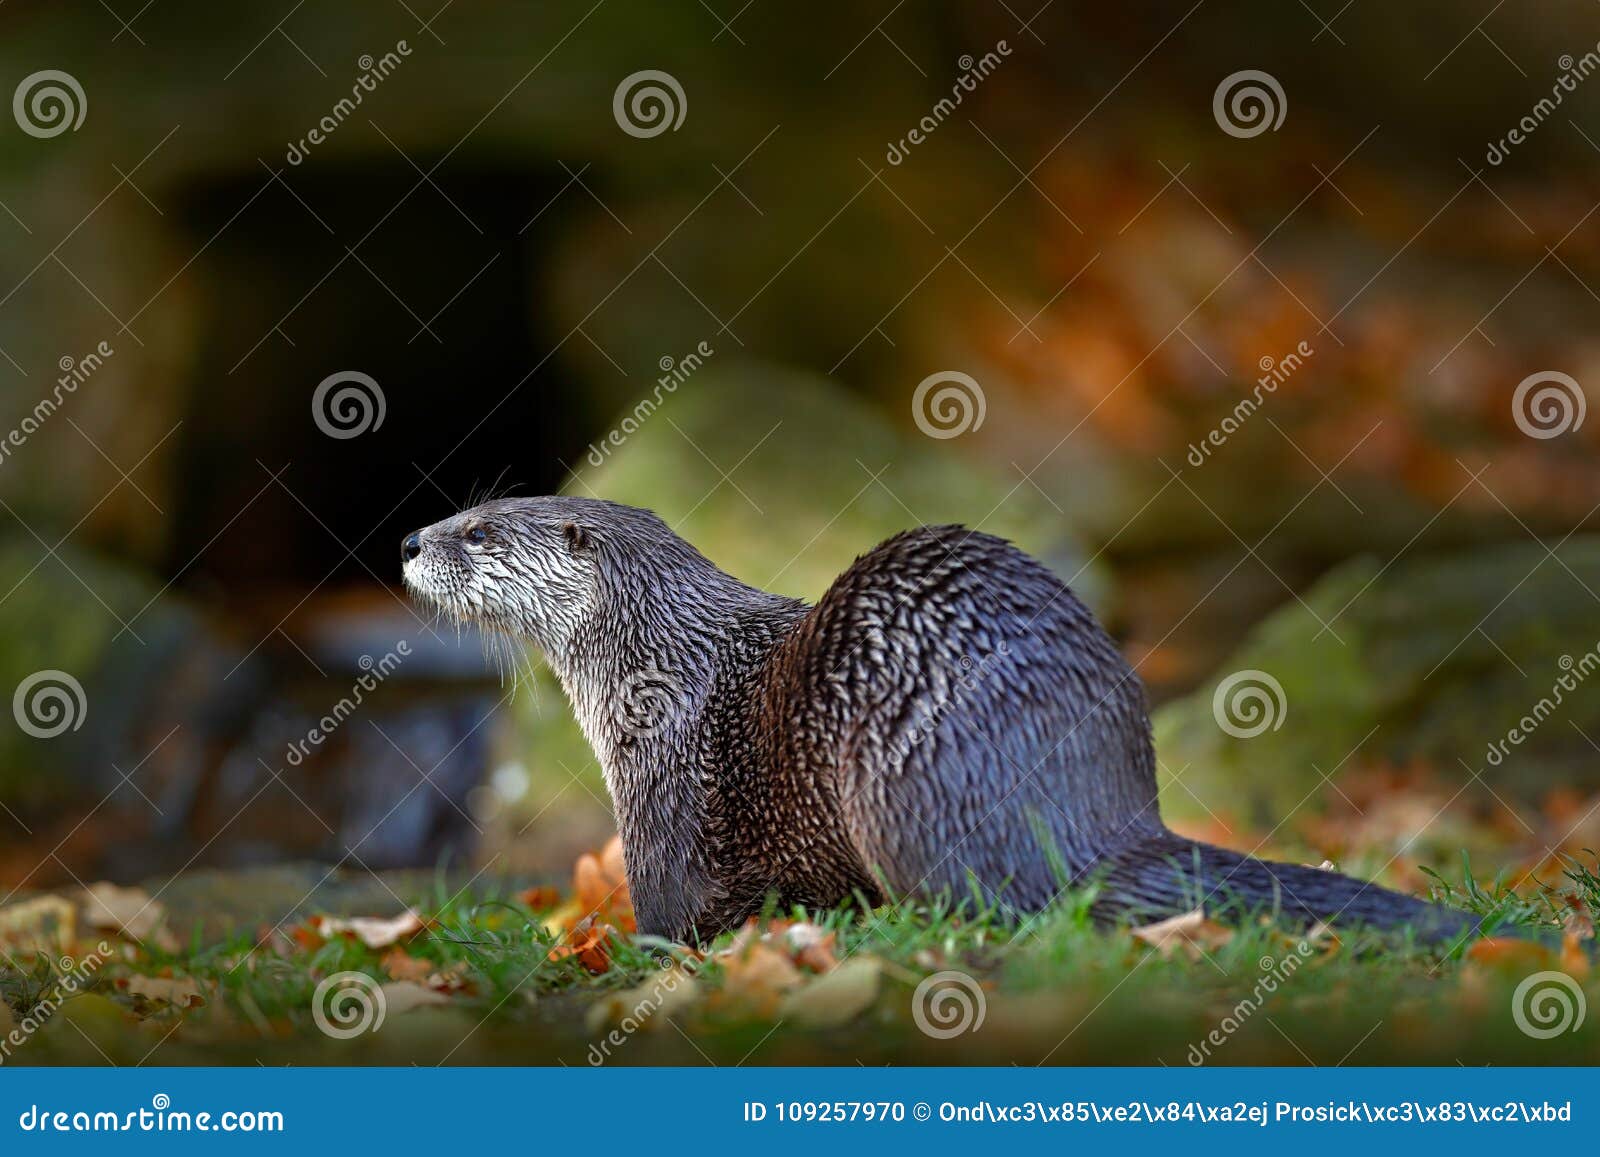 north american river otter, lontra canadensis, detail portrait water animal in the nature habitat, germany. detail portrait of wat